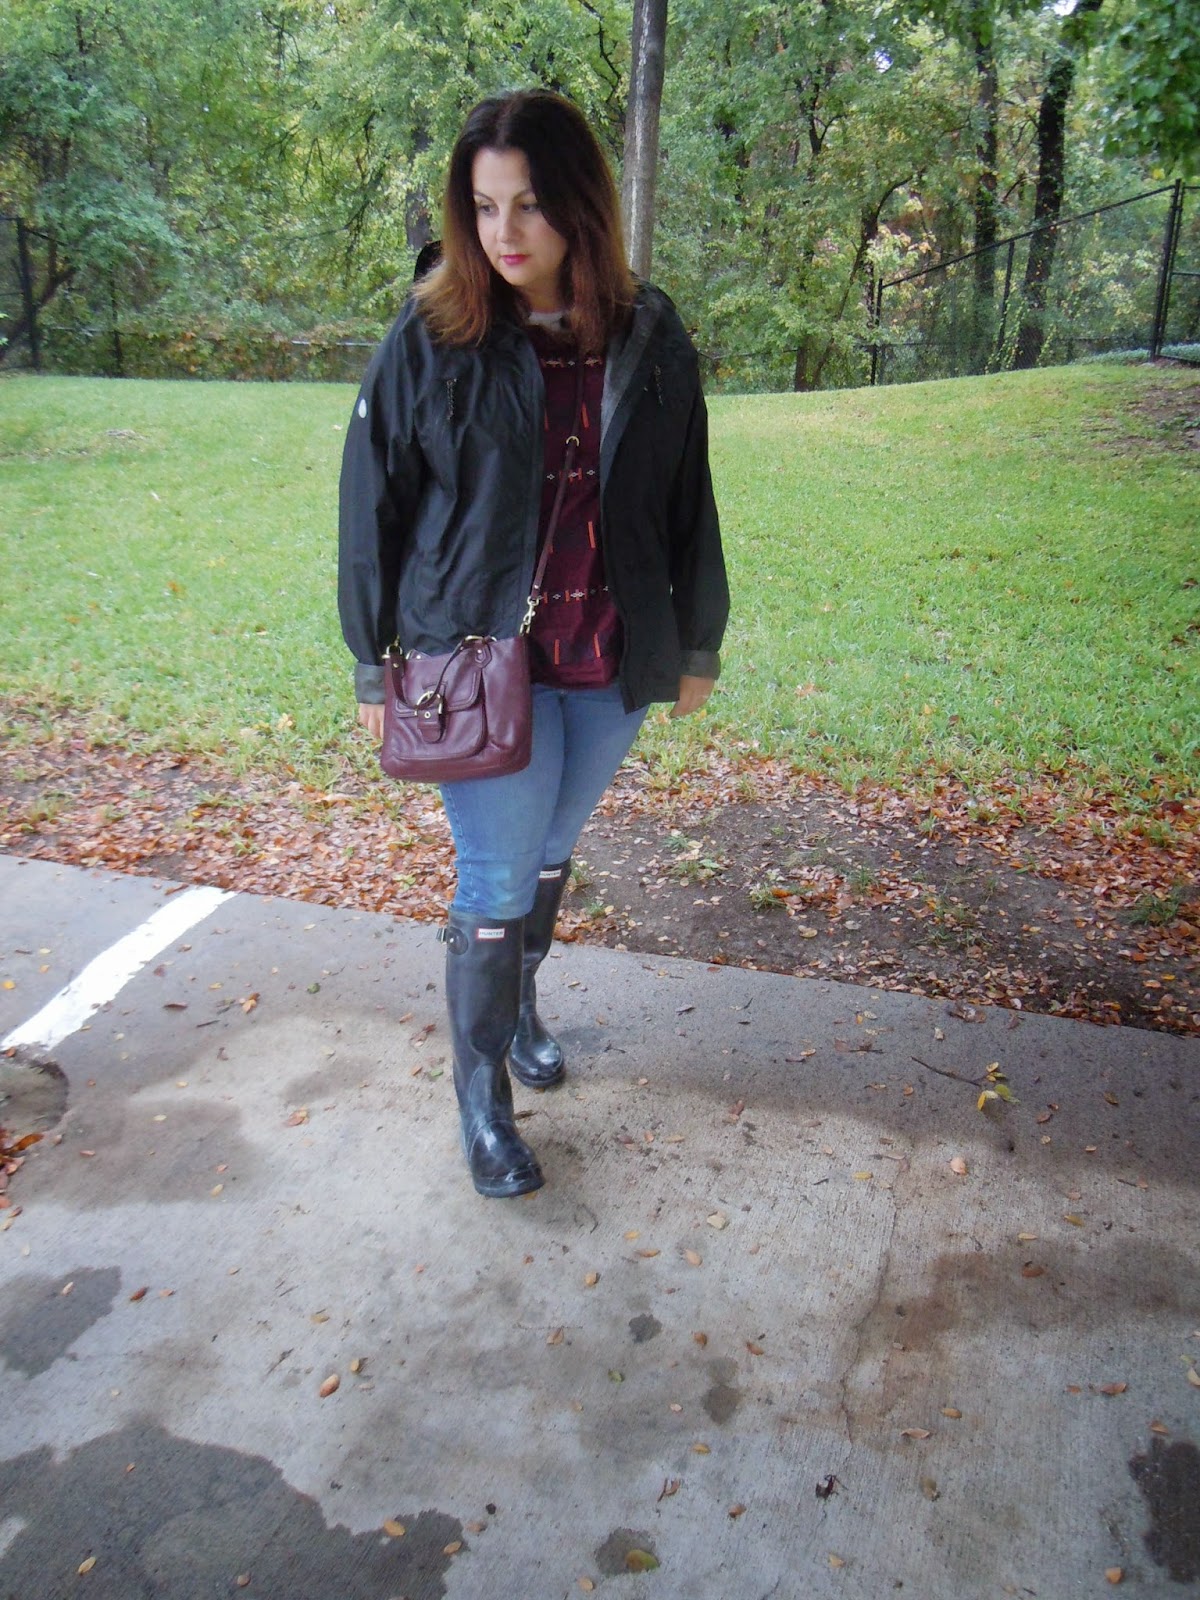 Joanna's Design: WHAT TO WEAR: On a rainy day city outing